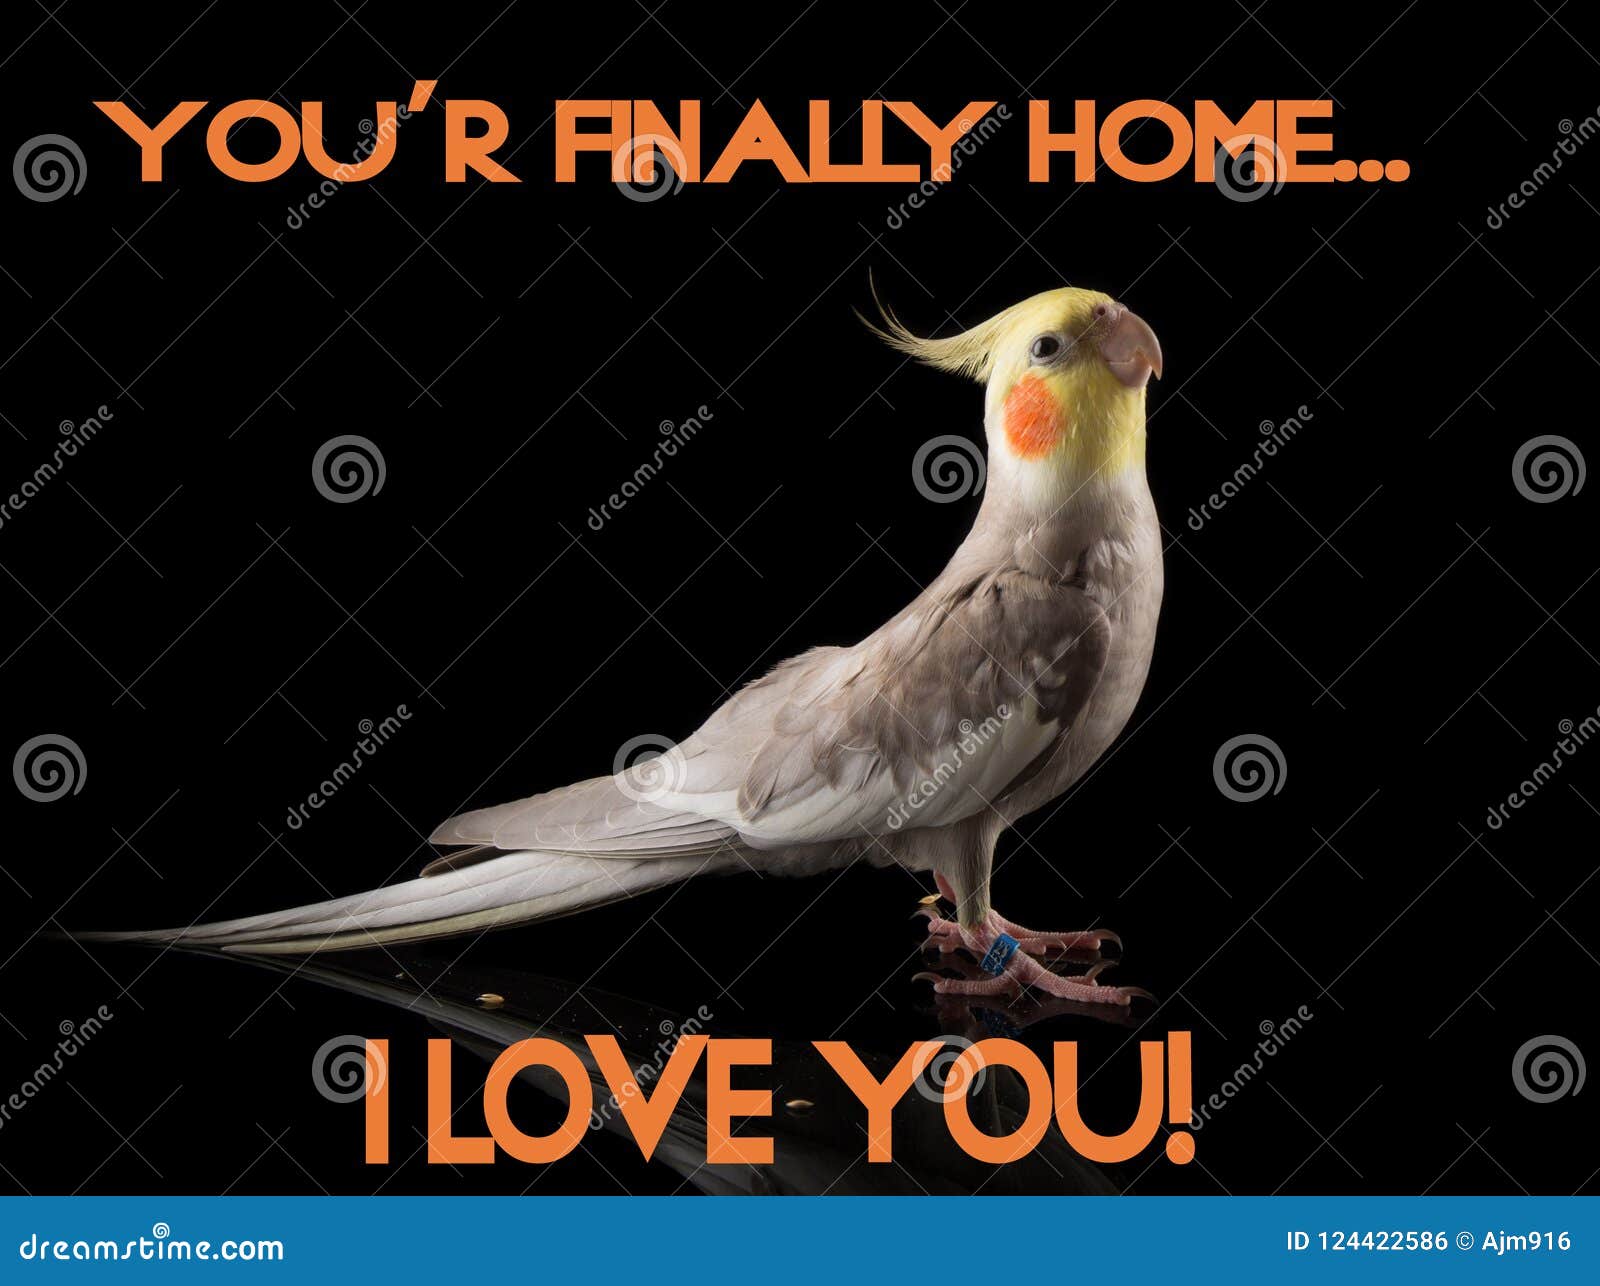 Meme, Parrot Quote, Cockatiel Very Cute Happy Crest Down, Smiling, Happy Face In ...